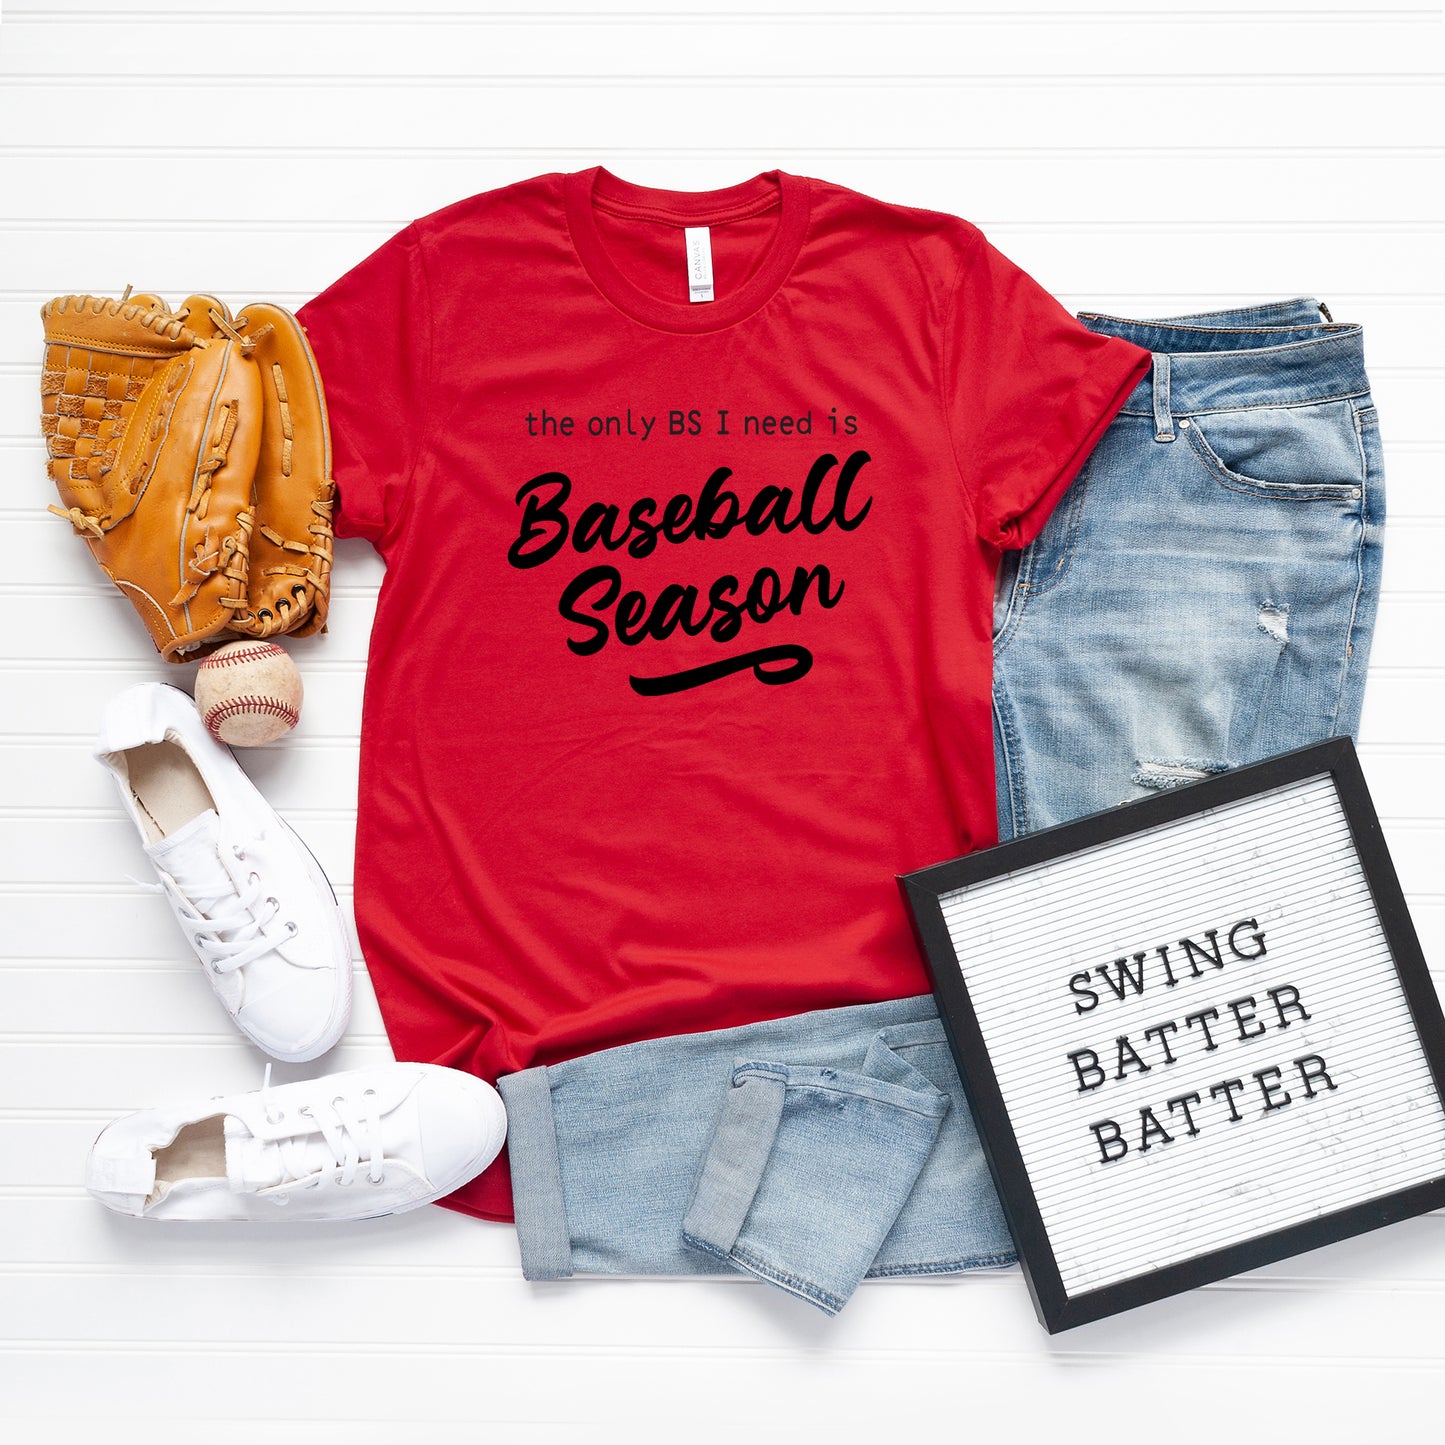 The Only BS I Need Is Baseball Season | Short Sleeve Graphic Tee